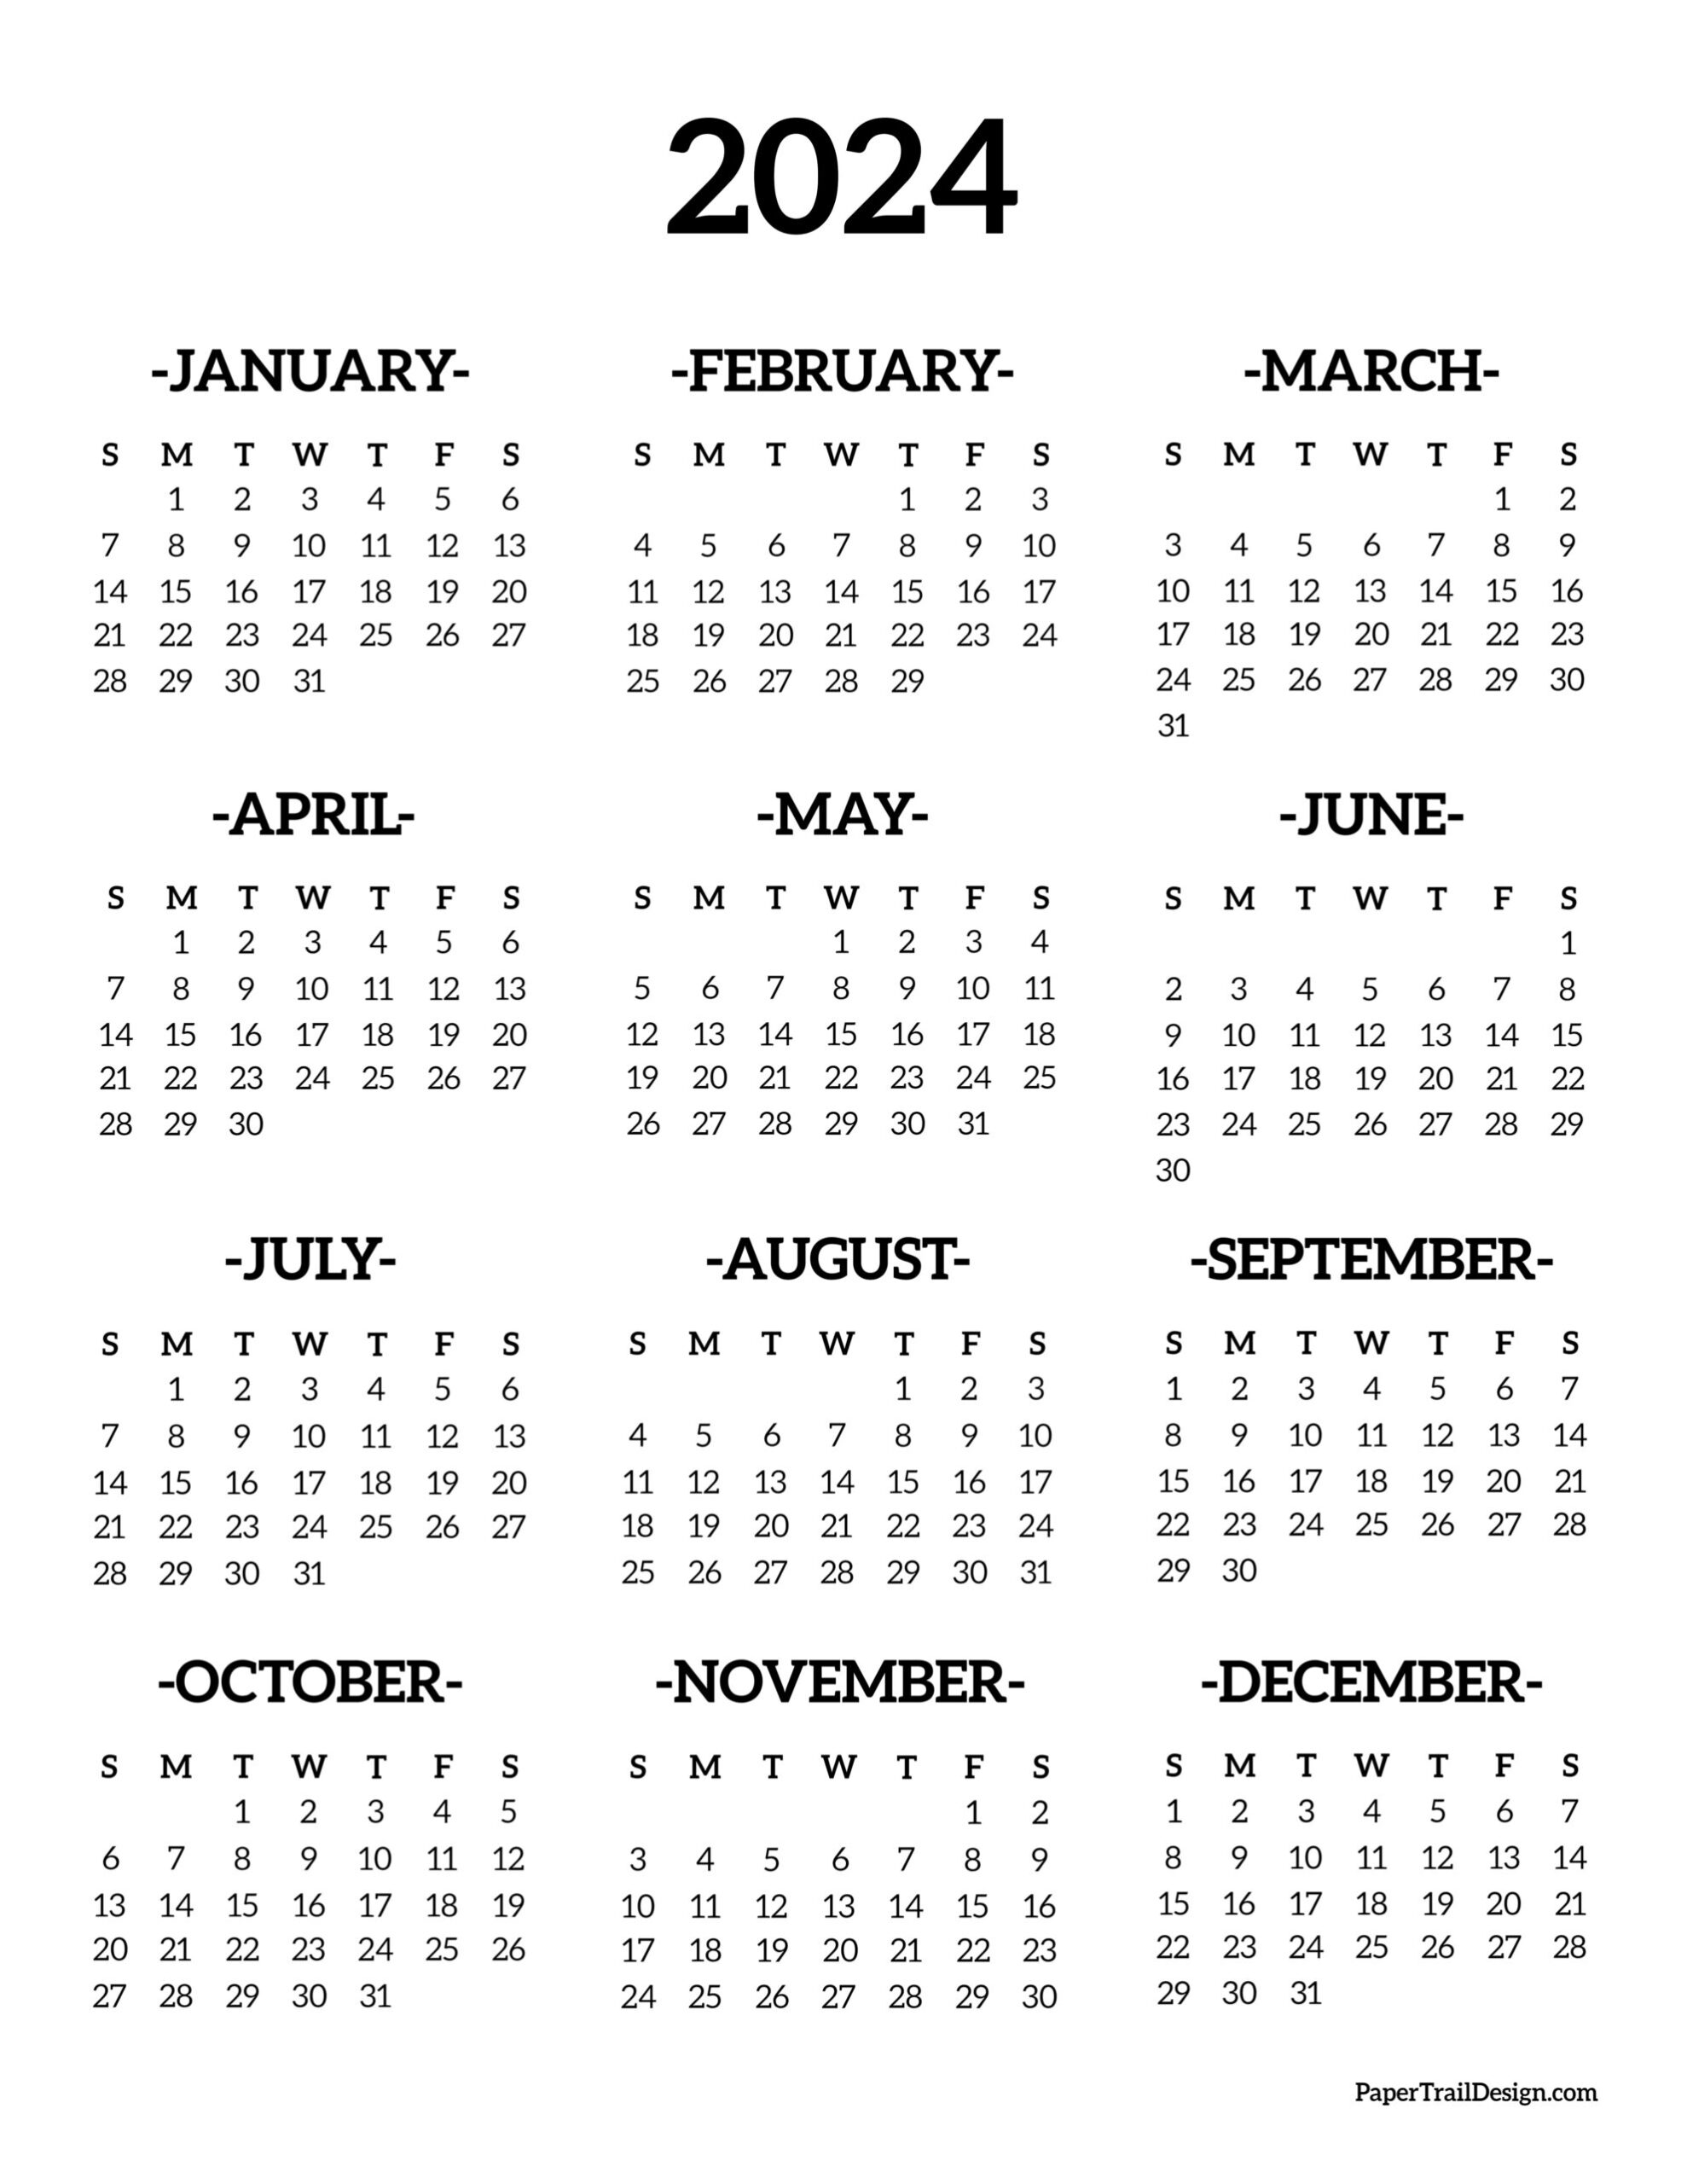 Calendar 2024 Printable One Page - Paper Trail Design for Printable 2024 Yearly Calendar